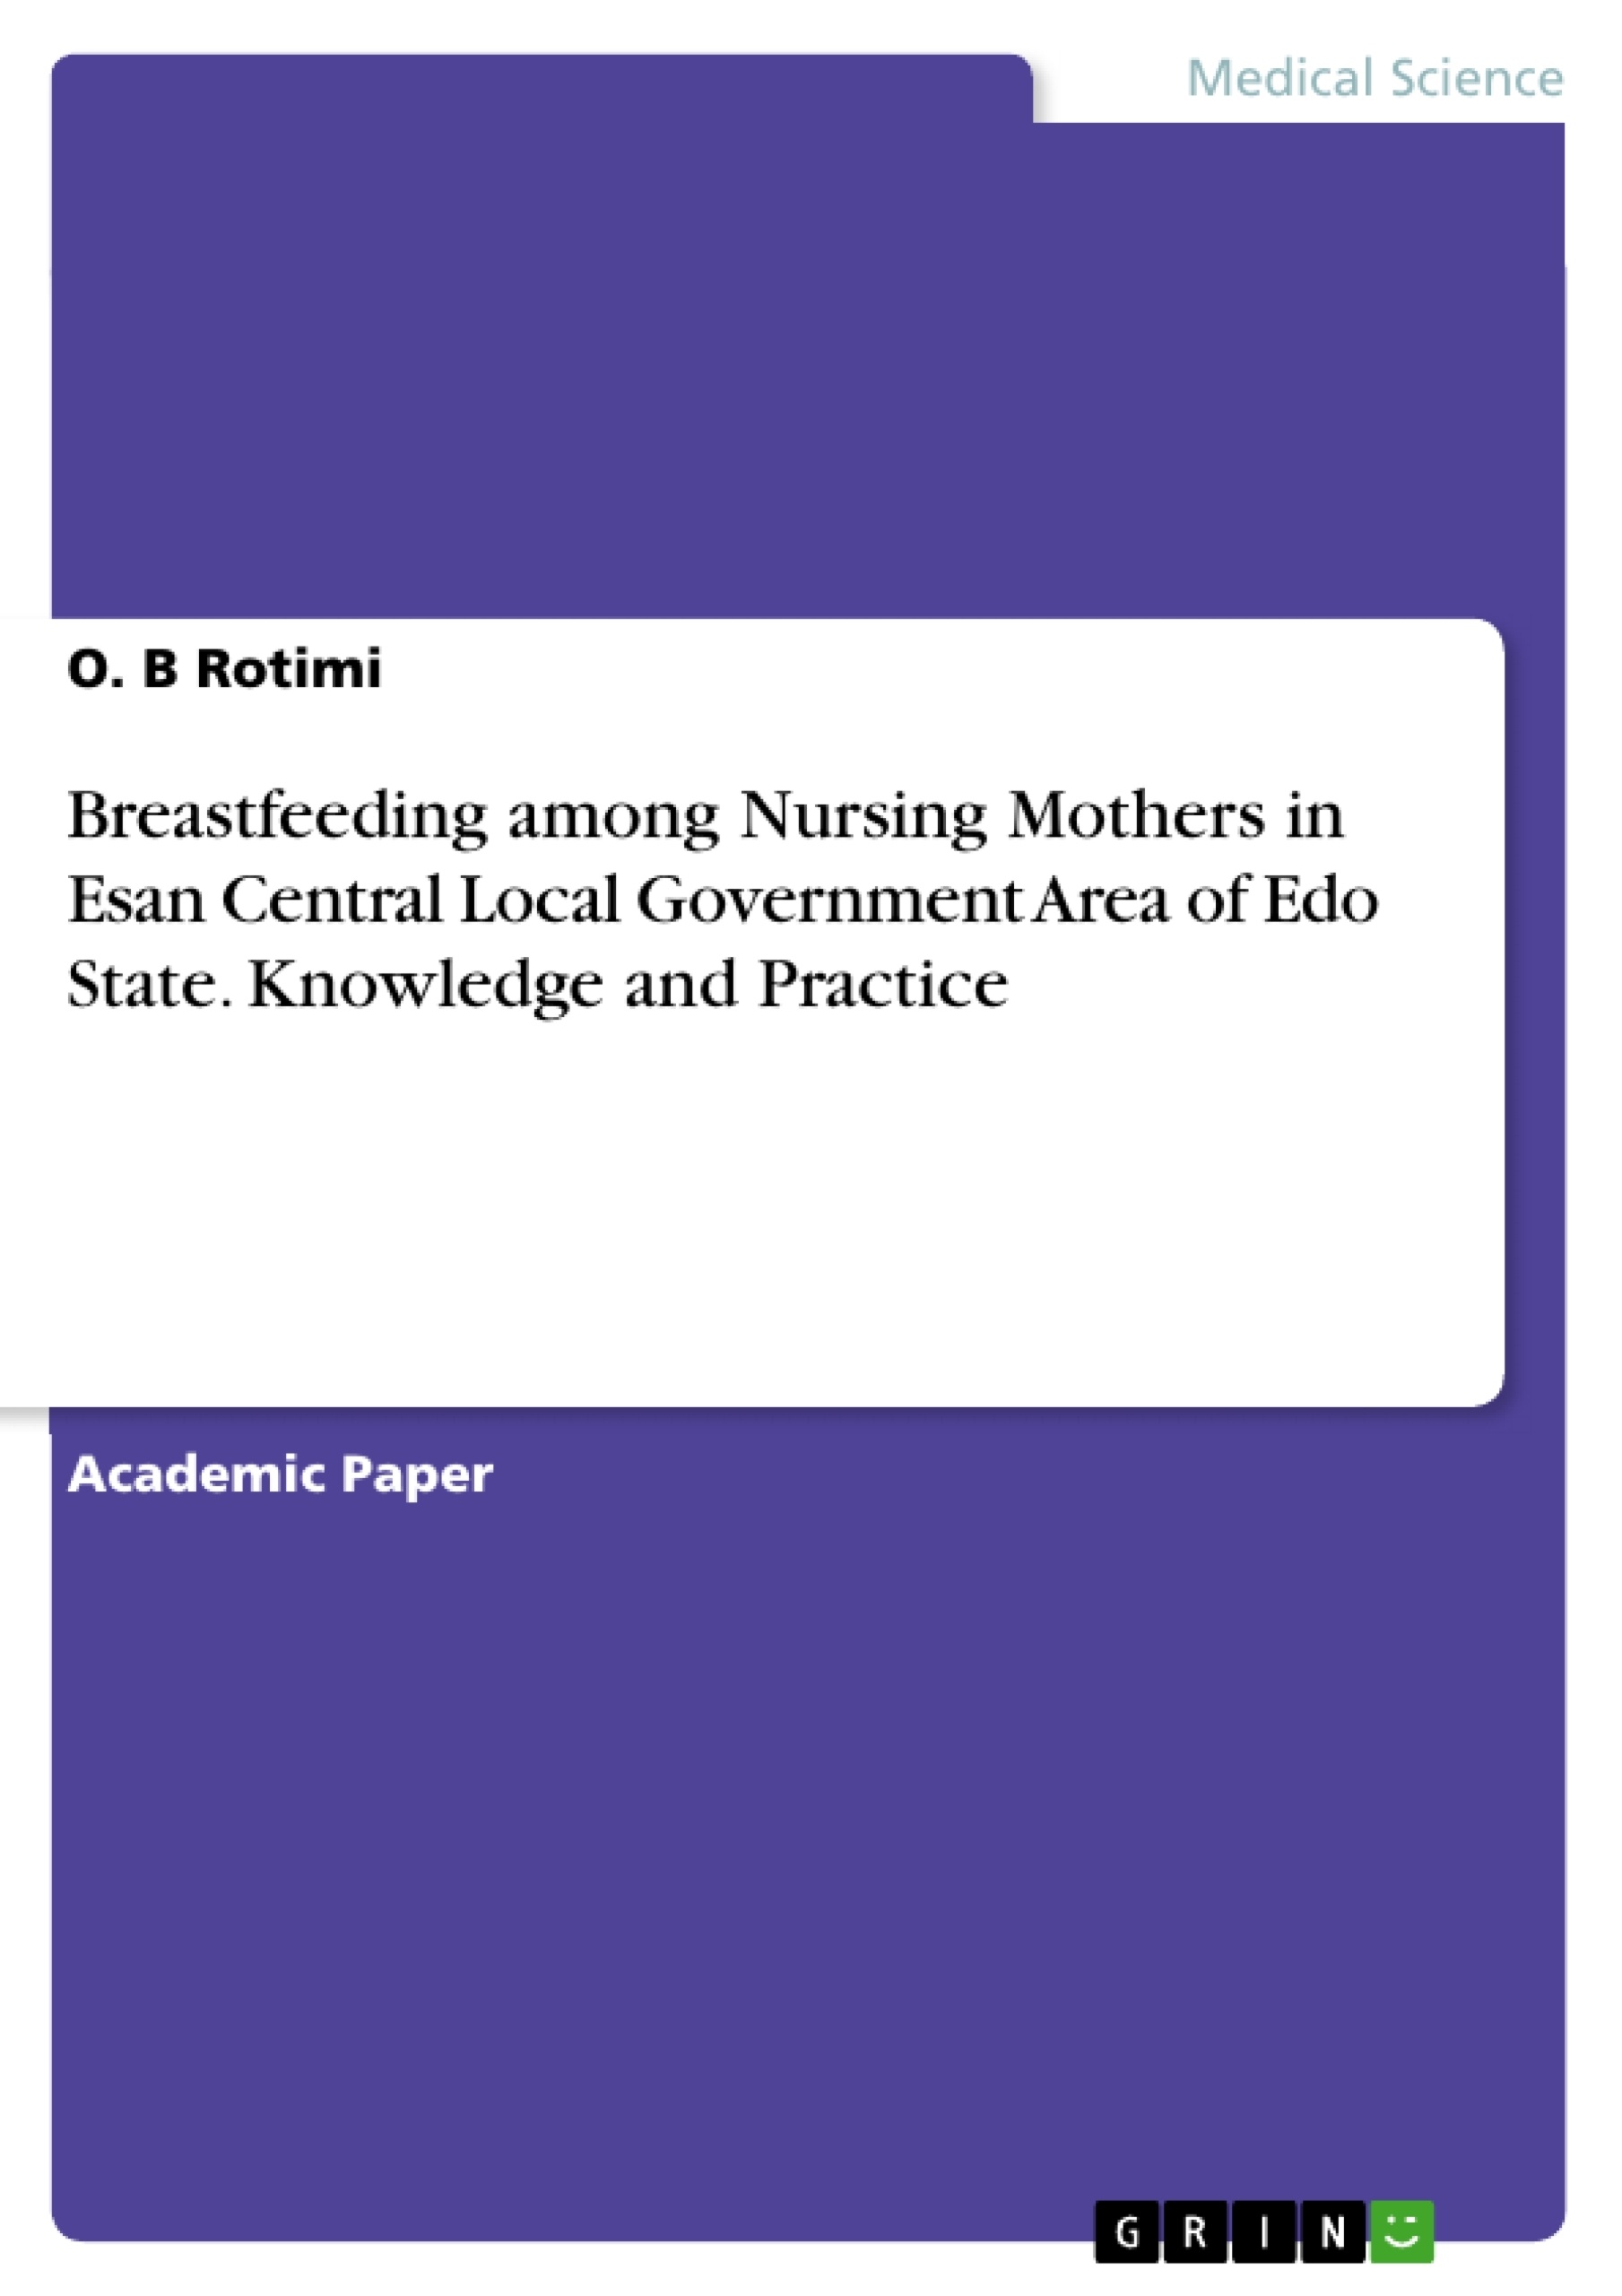 Title: Breastfeeding among Nursing Mothers in Esan Central Local Government Area of Edo State. Knowledge and Practice